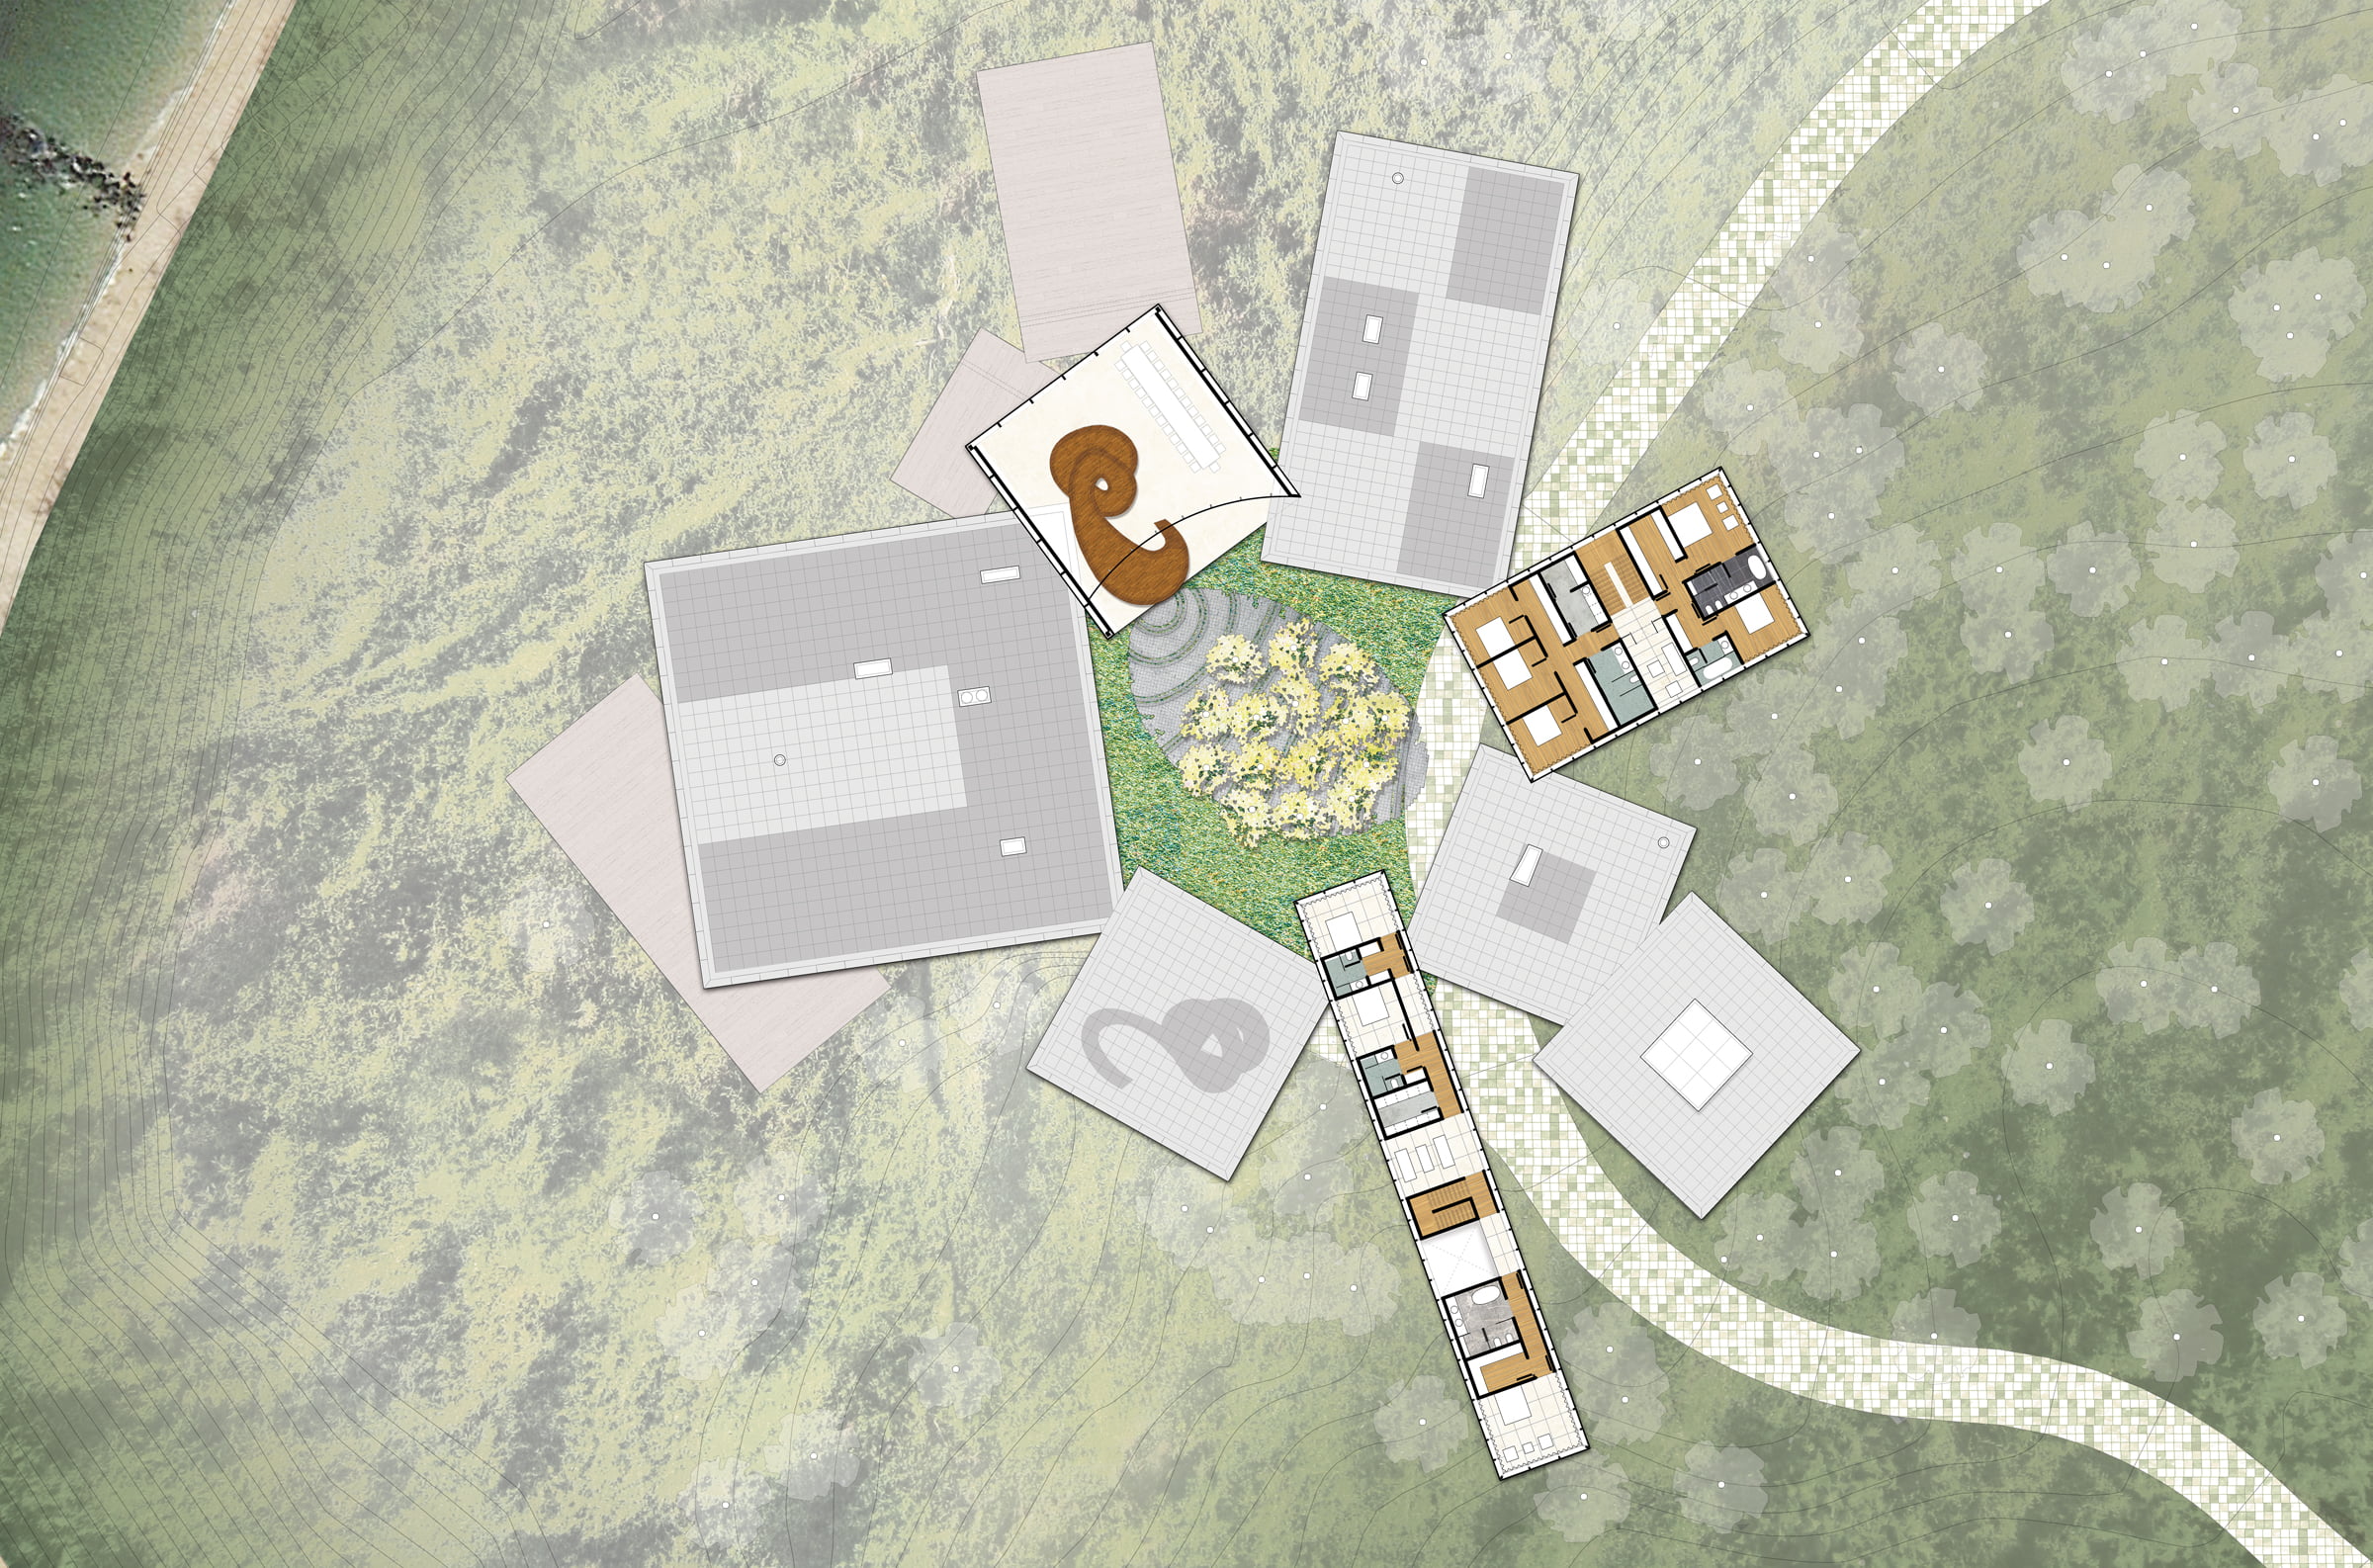 Necklace Residence Plan Level 2.